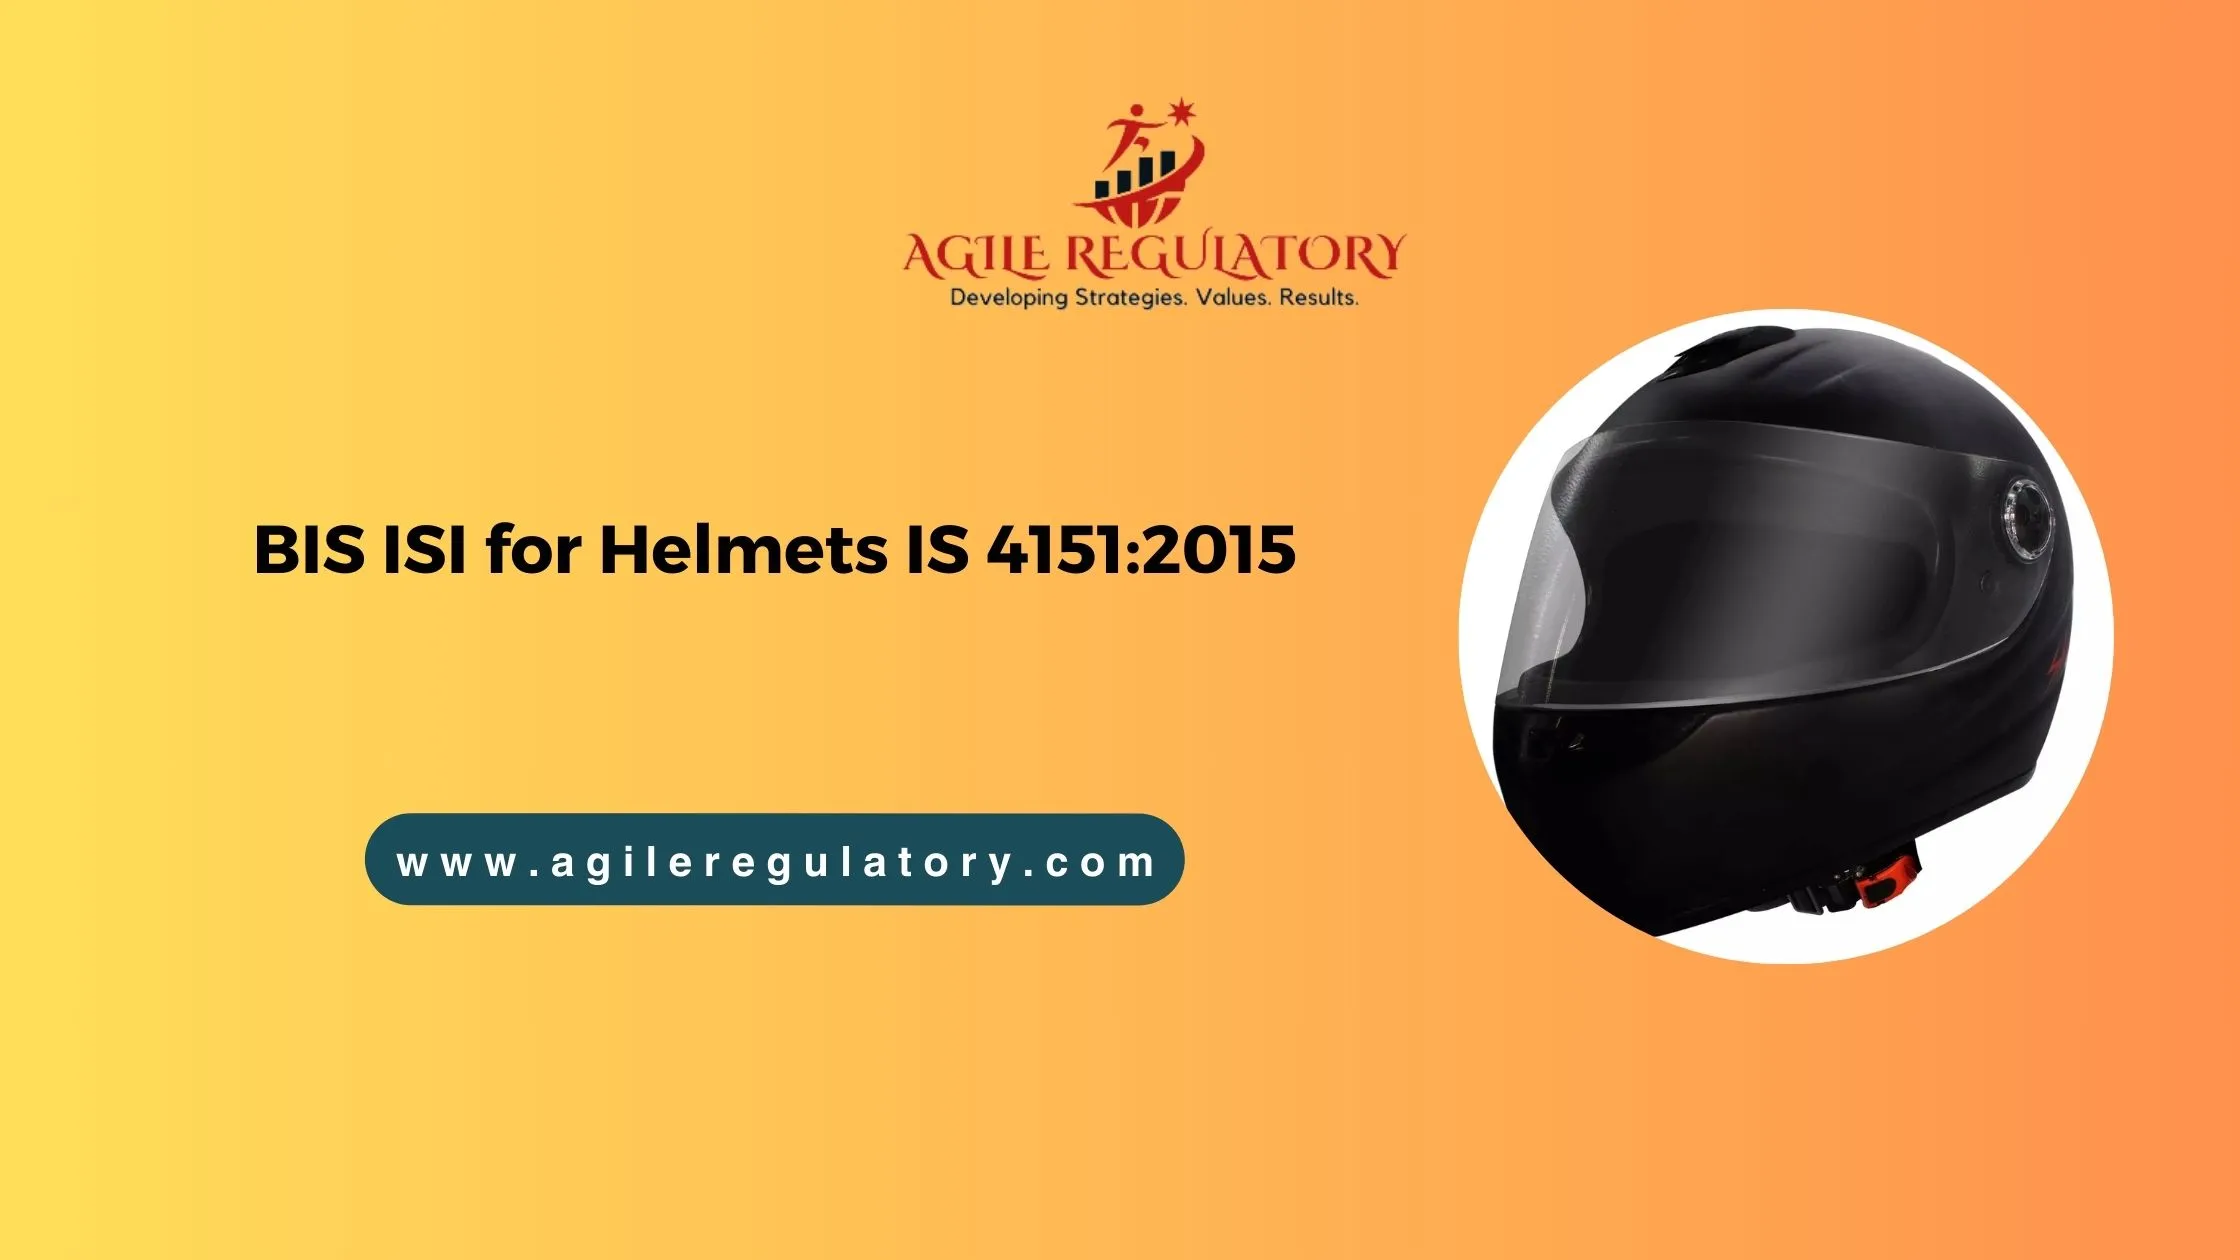 BIS ISI for Helmets IS 4151:2015